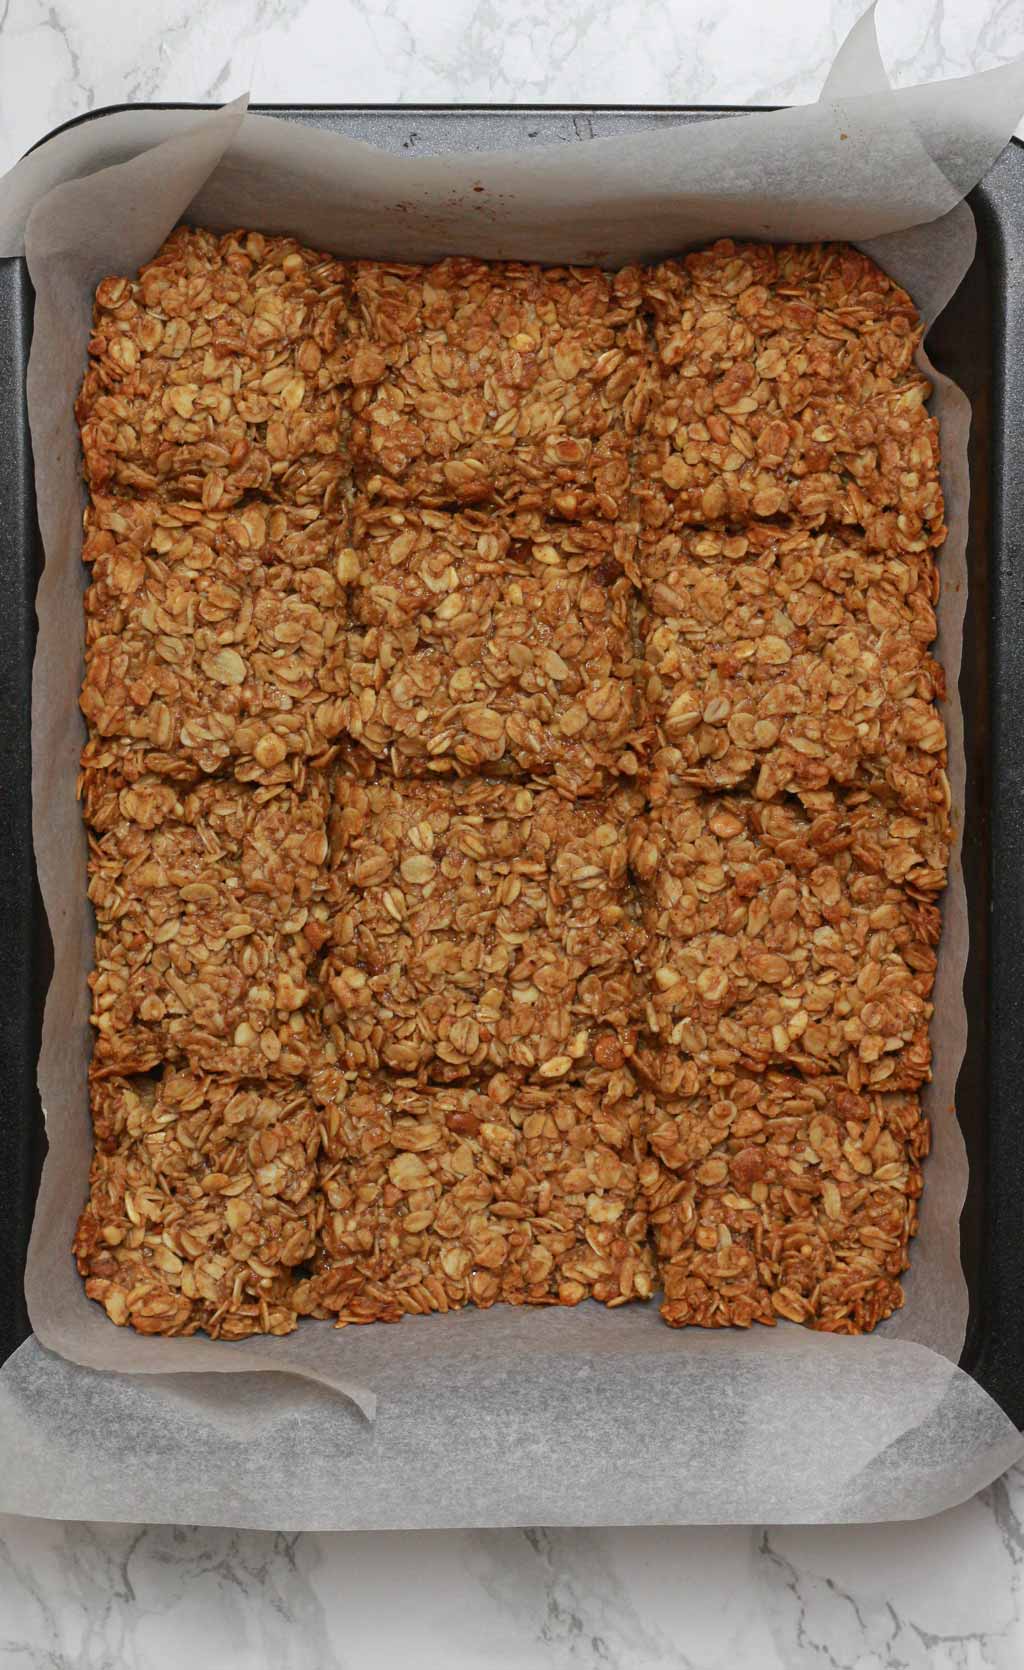 Baked Flapjacks With Score Lines In Them While Still In The Tin